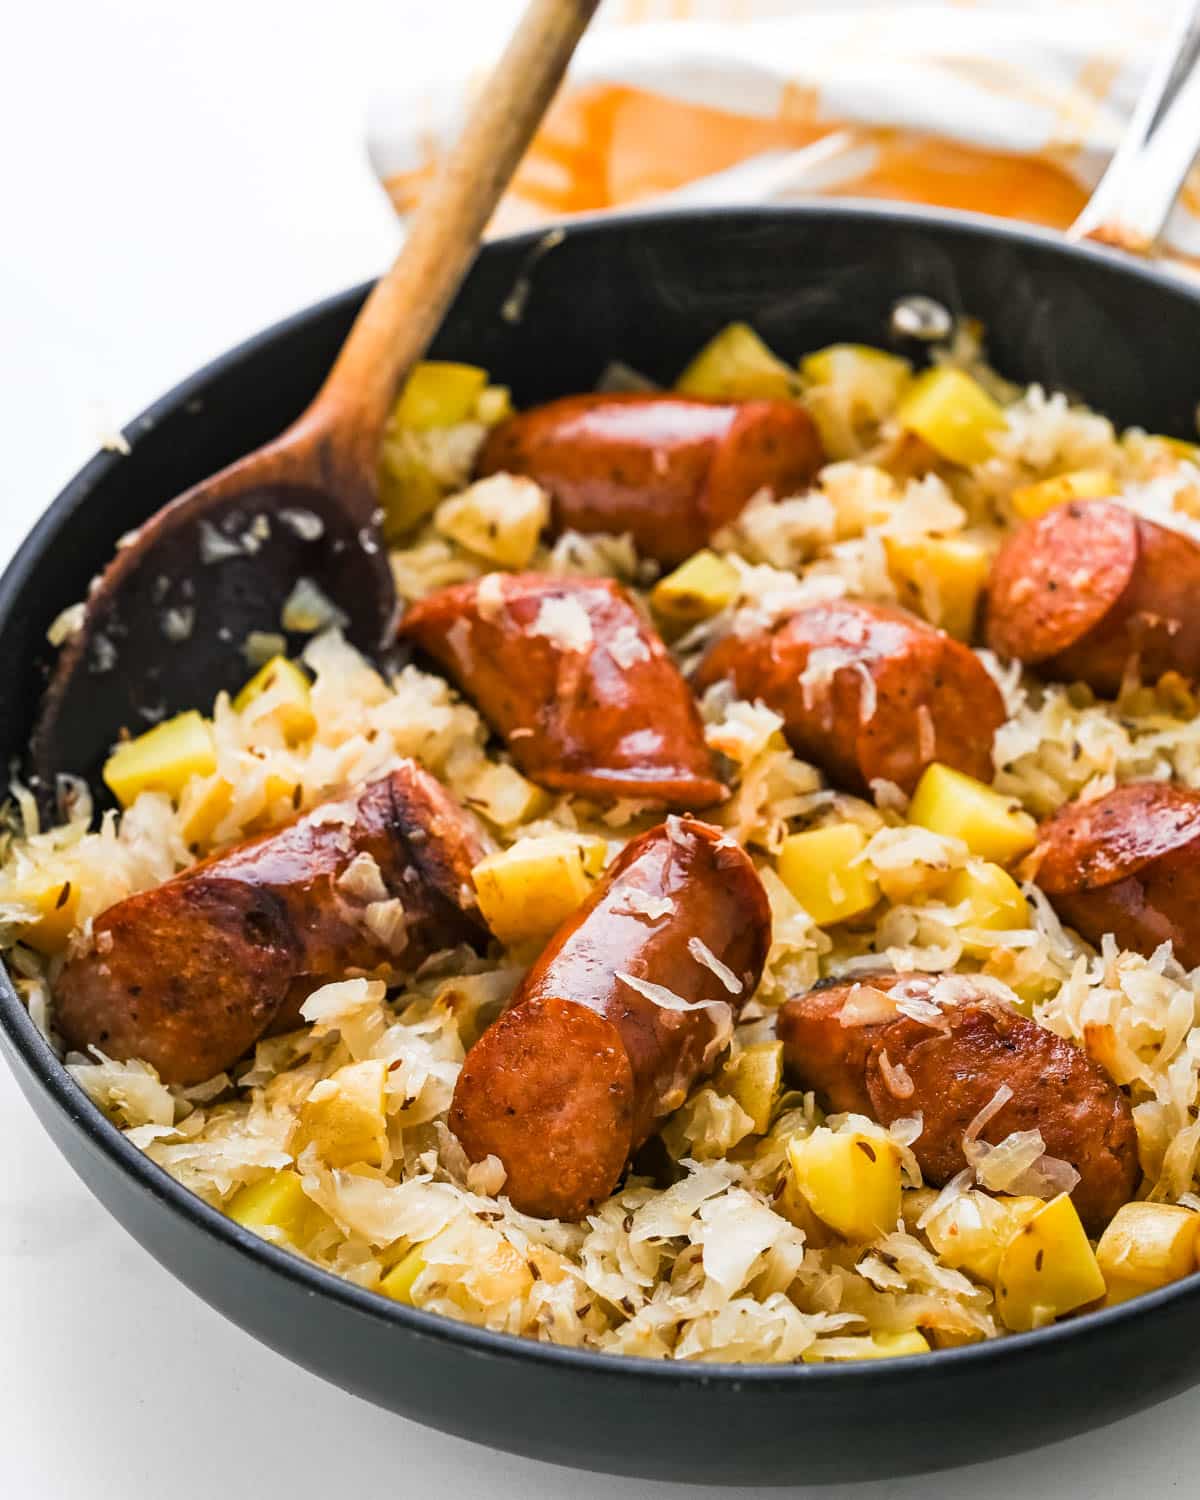 sausage and sauerkraut with potatoes served in a skillet